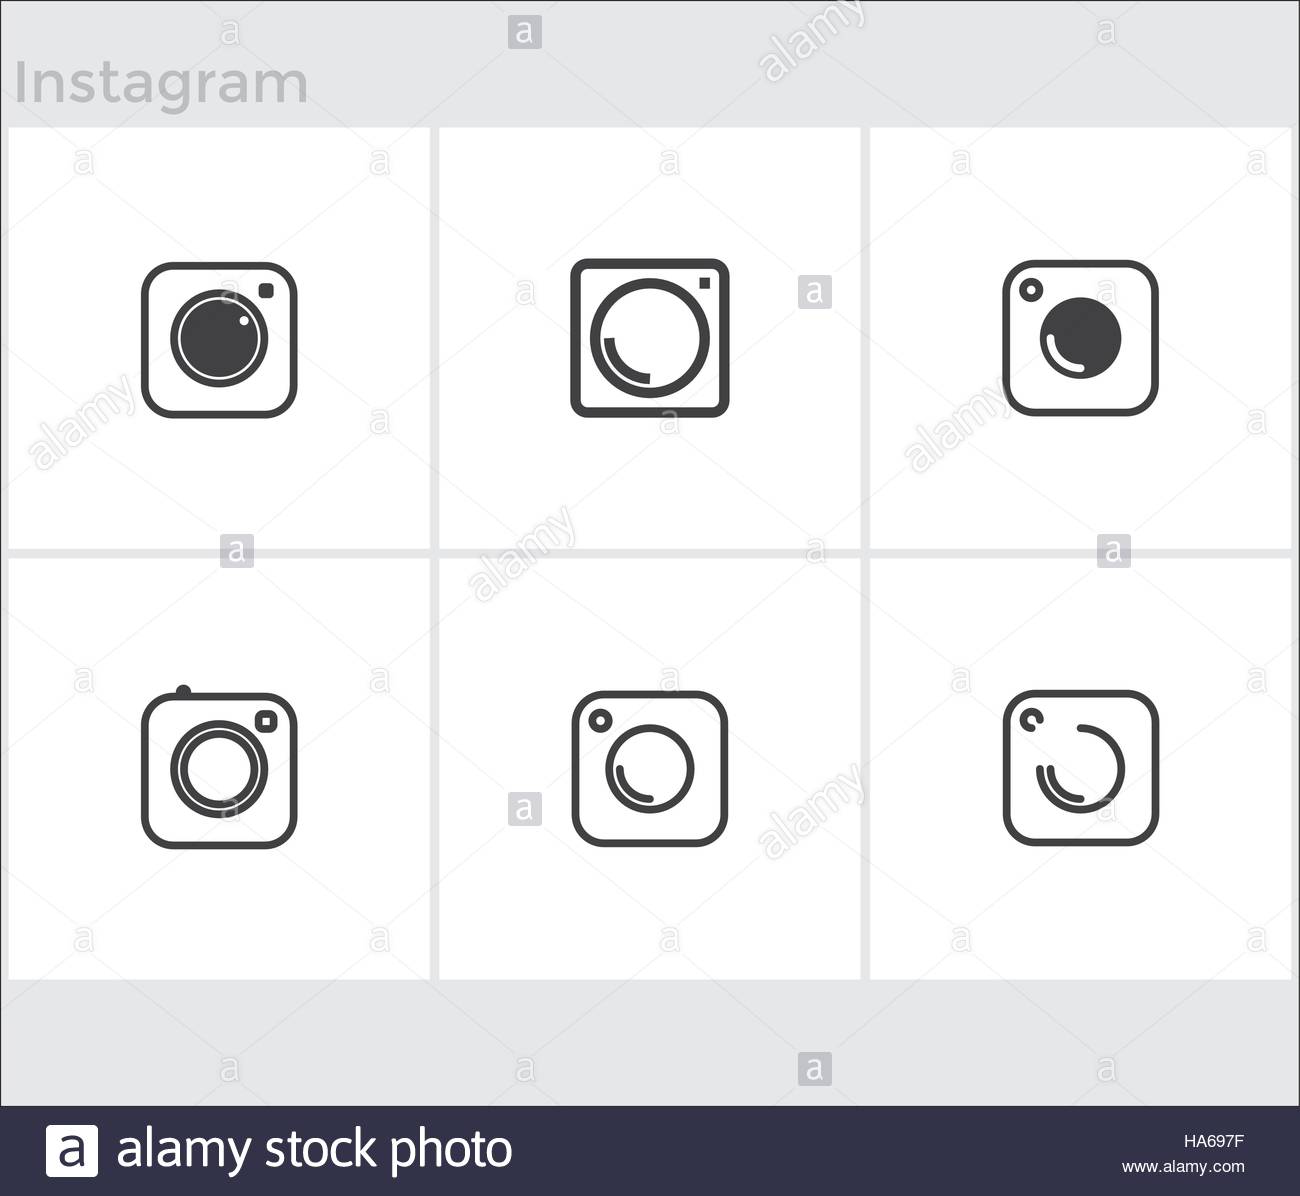 Set of instagram icon black color isolated on white background 